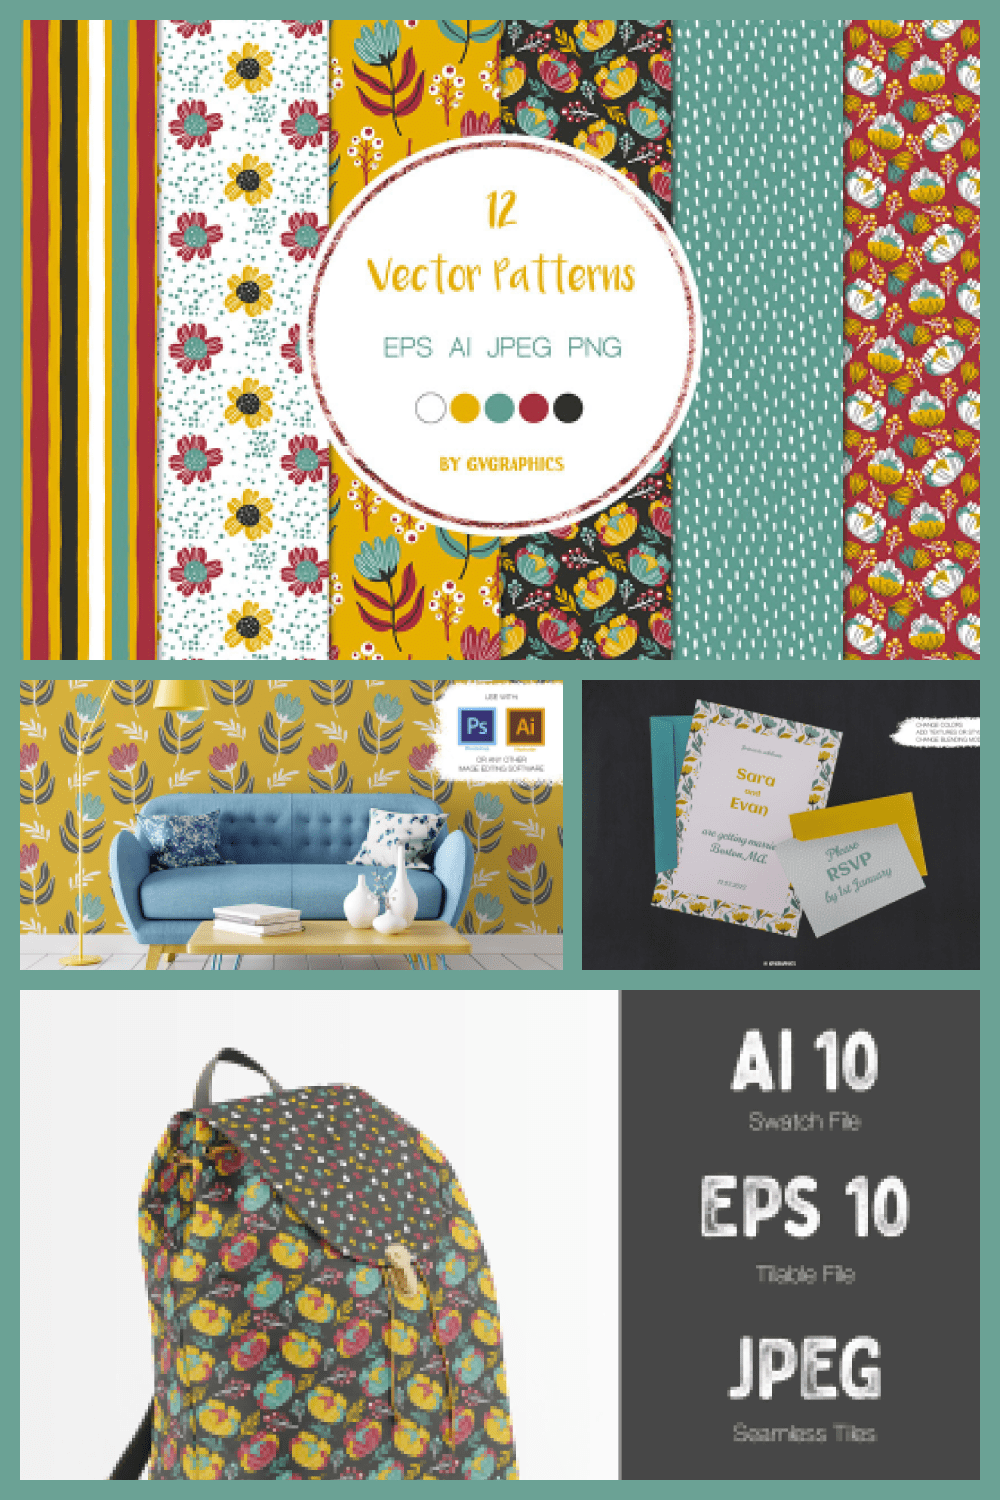 Colorful Vector Patterns with Flowers, Leaves and Berries - MasterBundles - Pinterest Collage Image.